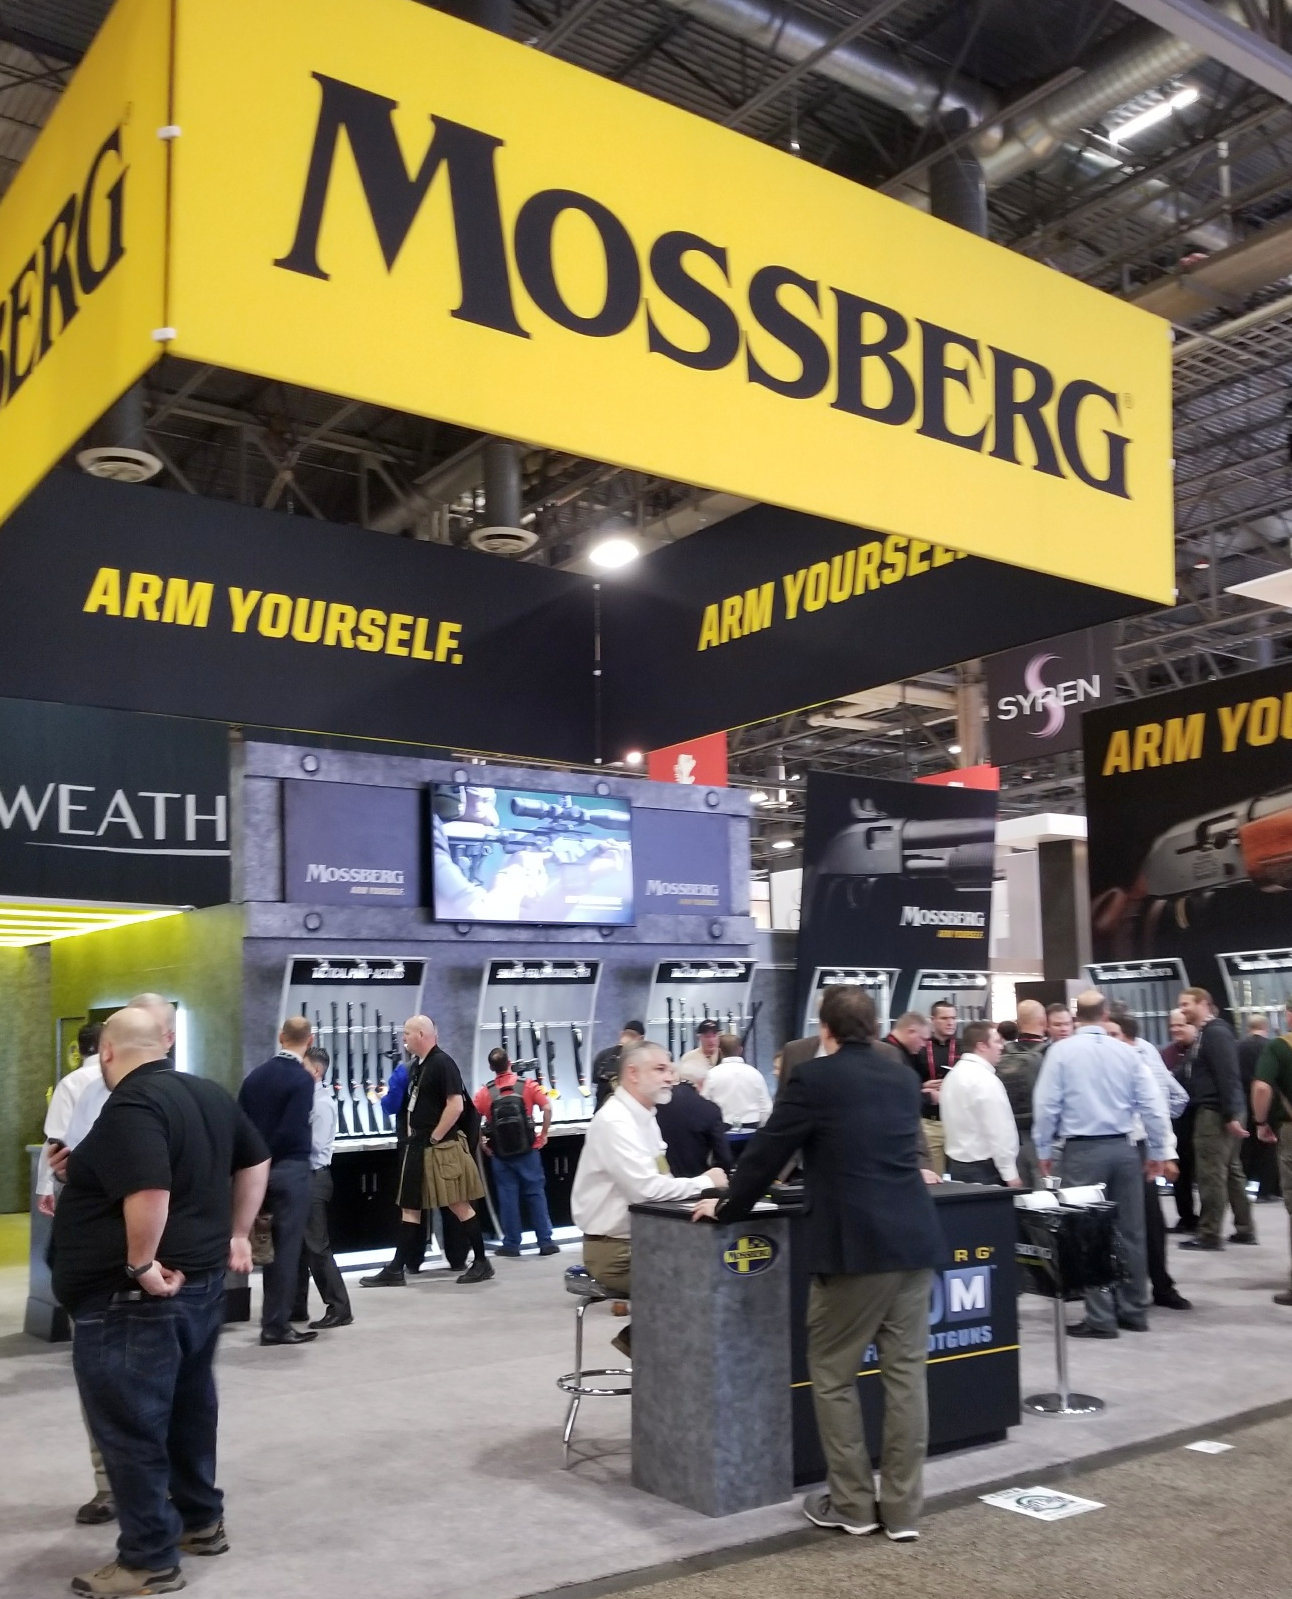 The Mossberg booth at the SHOT Show.